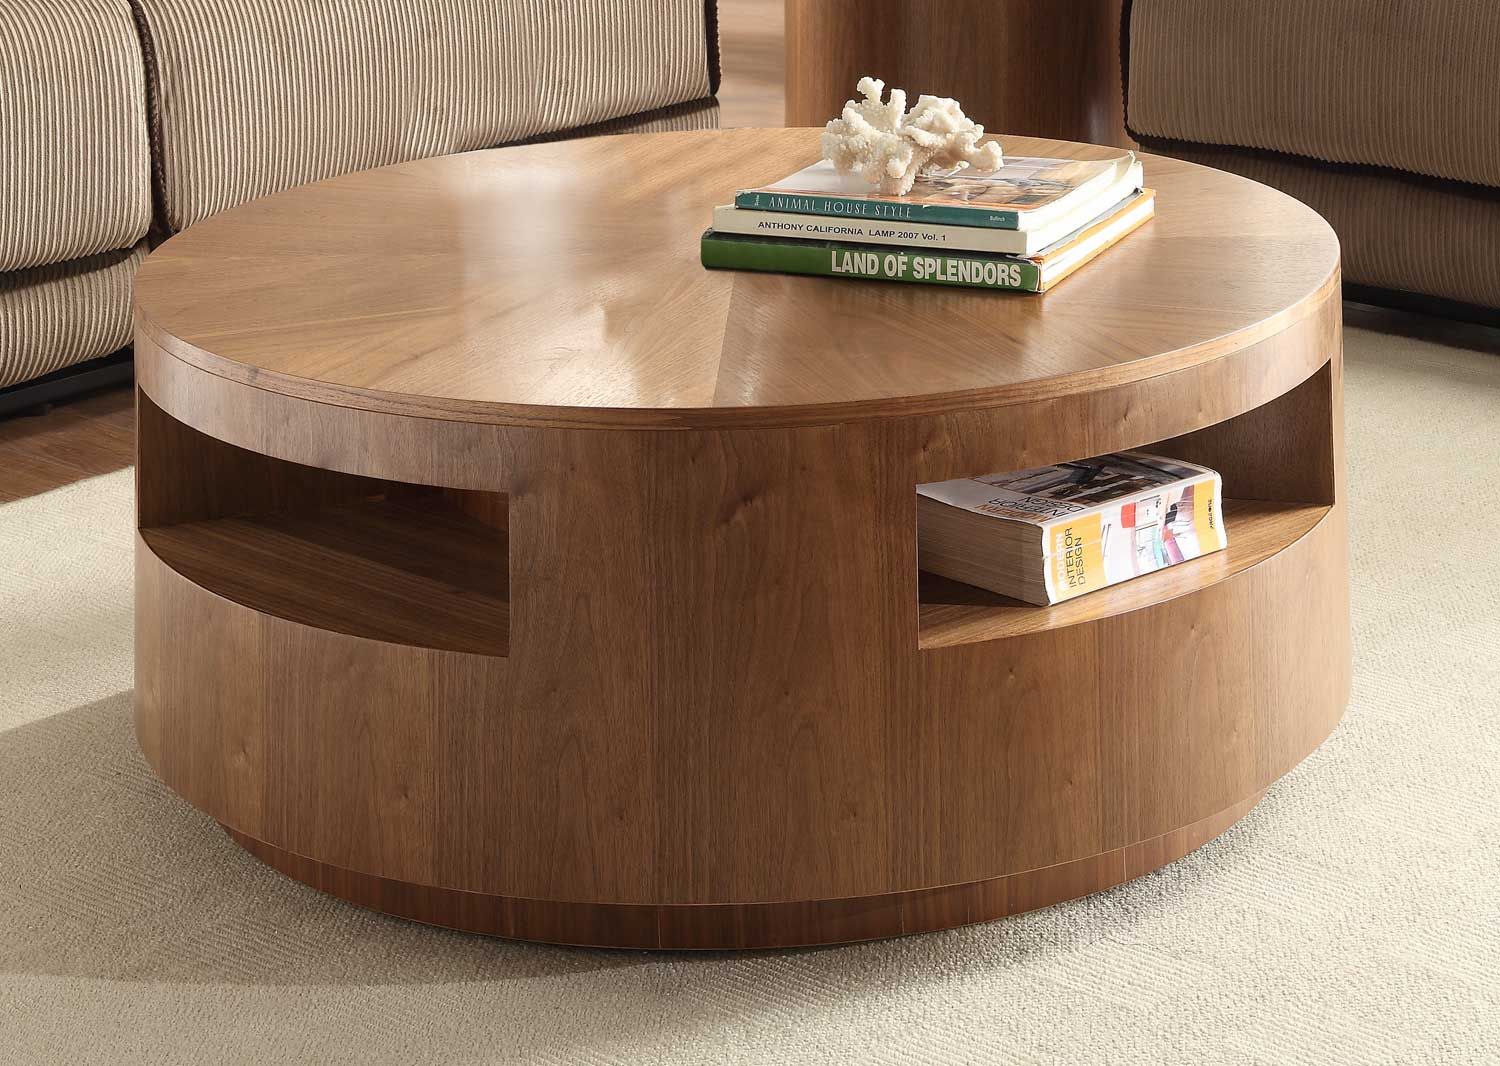 The Round Coffee Tables With Storage – The Simple And Compact Furniture Inside Round Coffee Tables With Storage (Gallery 2 of 20)